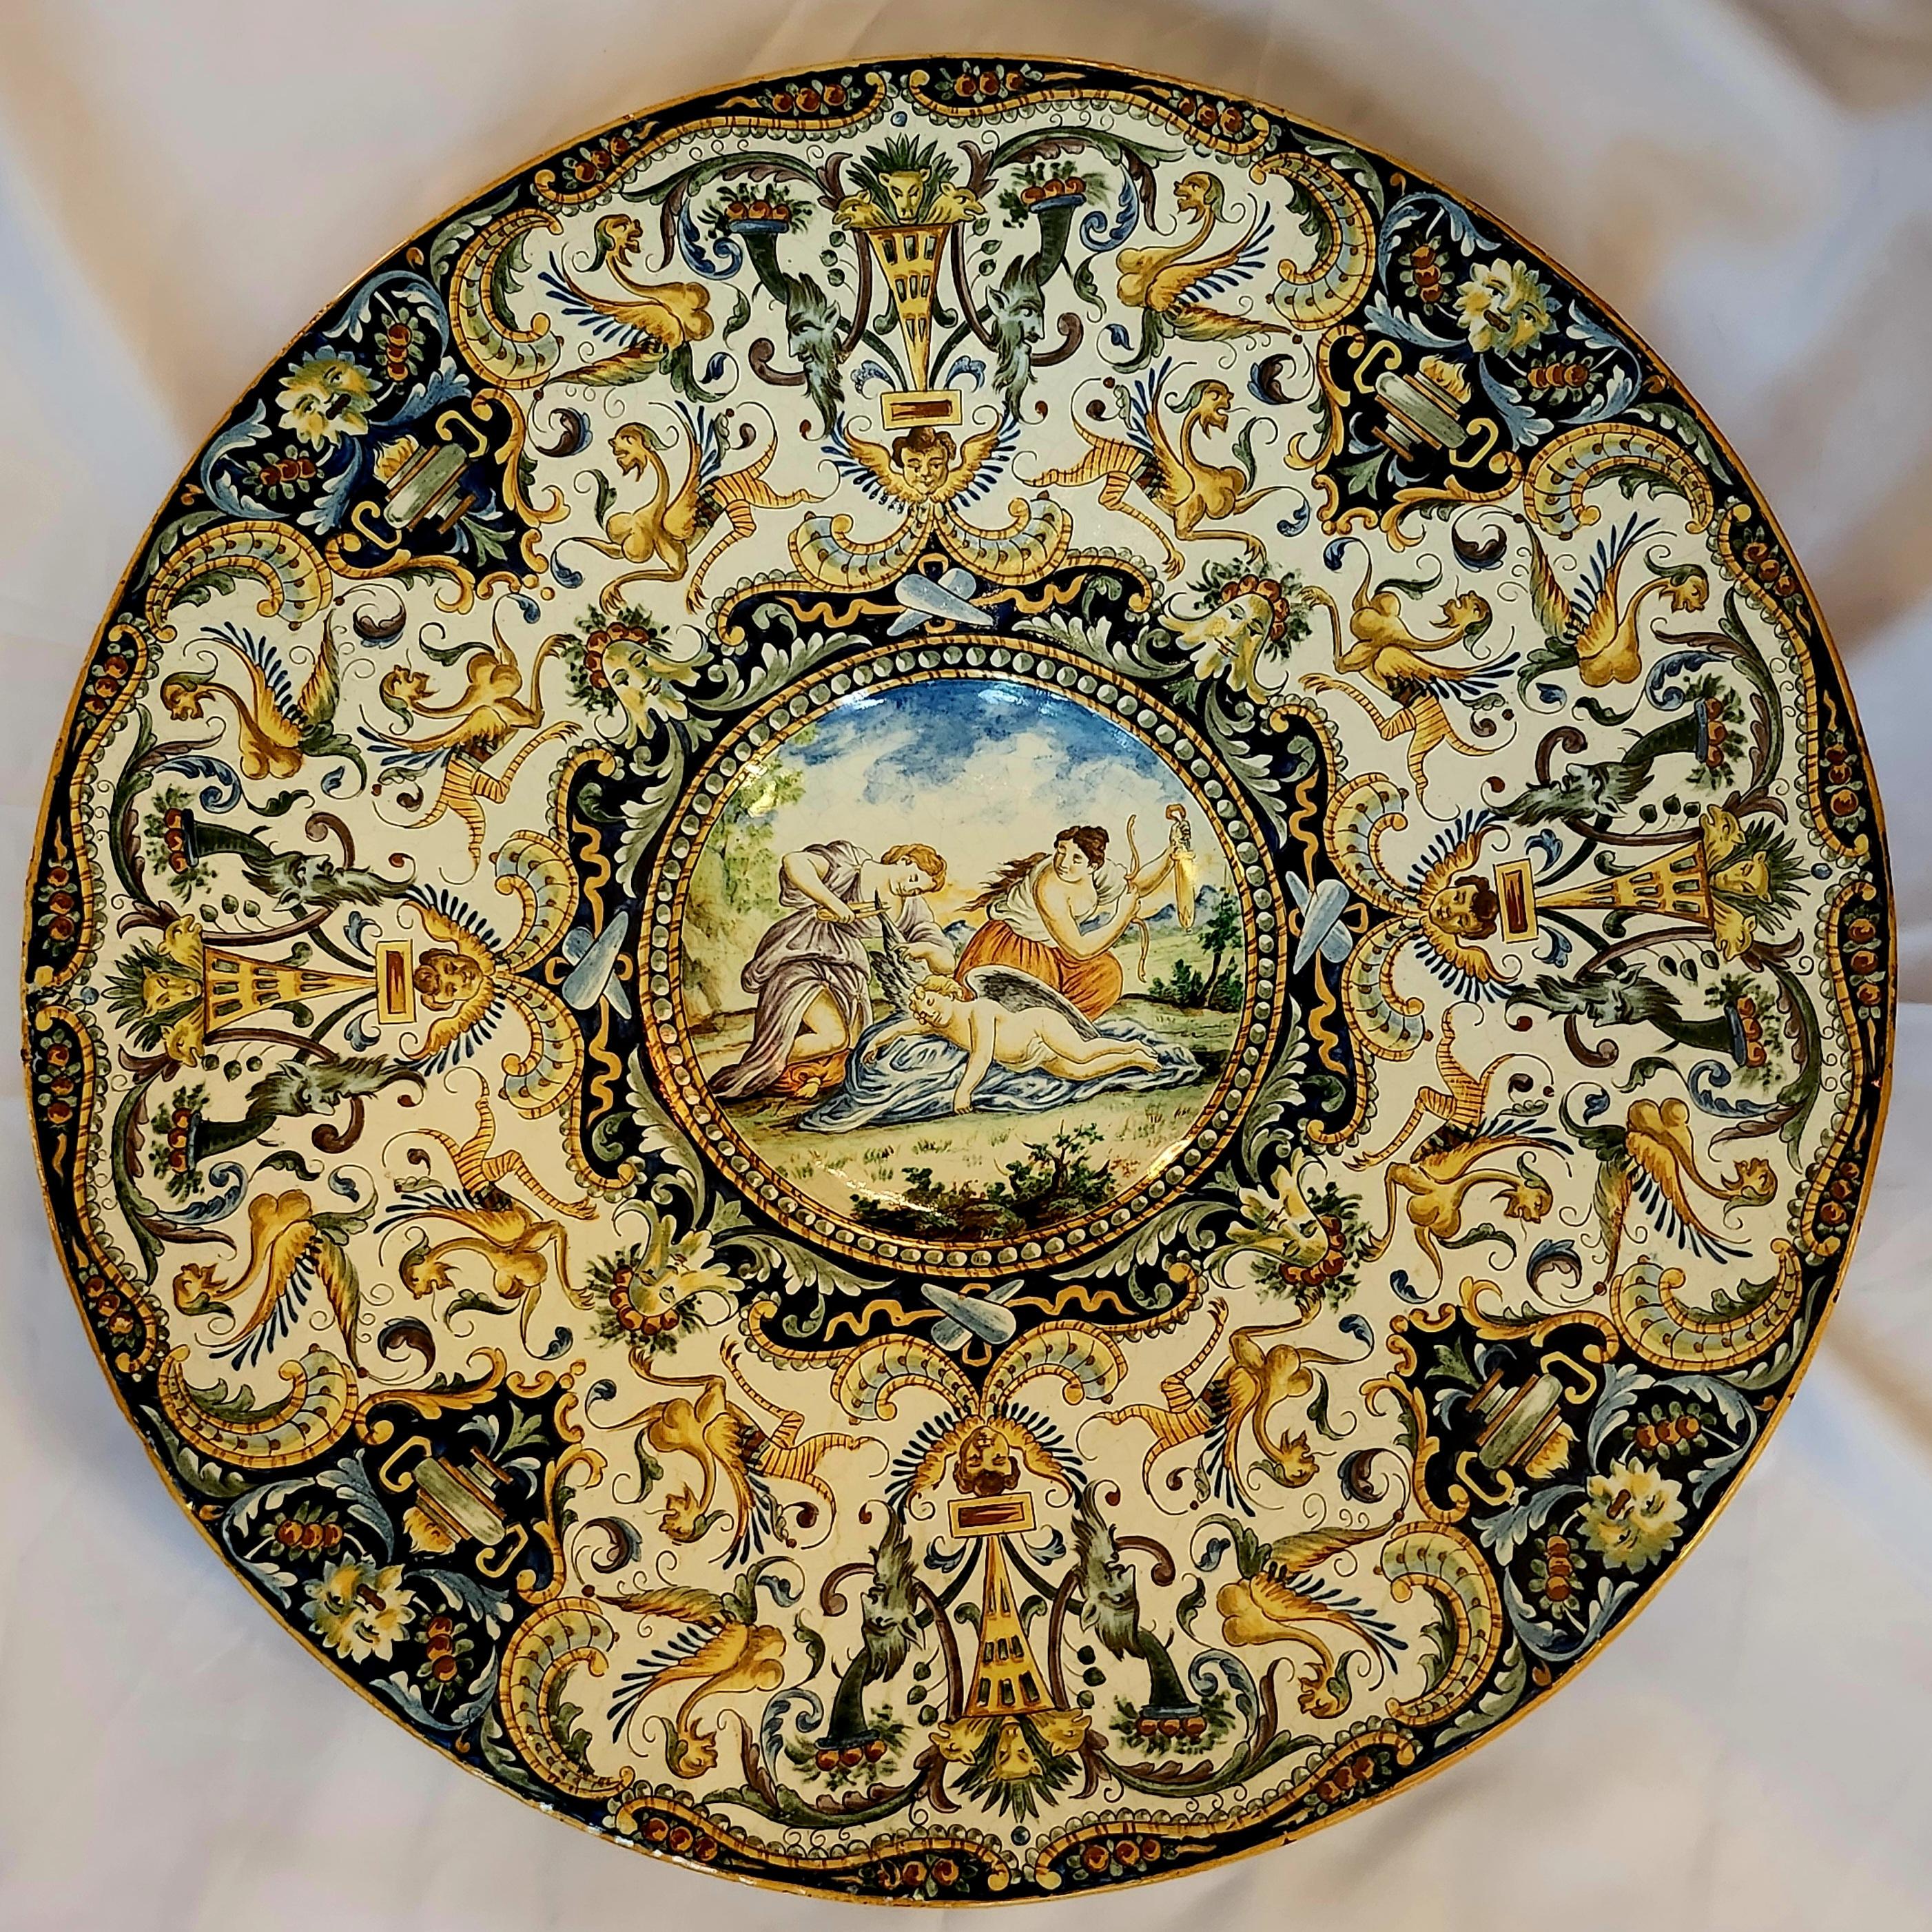 Maiolica chargers are large, decorative ceramic plates that are part of the broader tradition of Maiolica pottery, a type of tin-glazed earthenware produced in Italy since the Renaissance period. These chargers are not just simple dishes but are